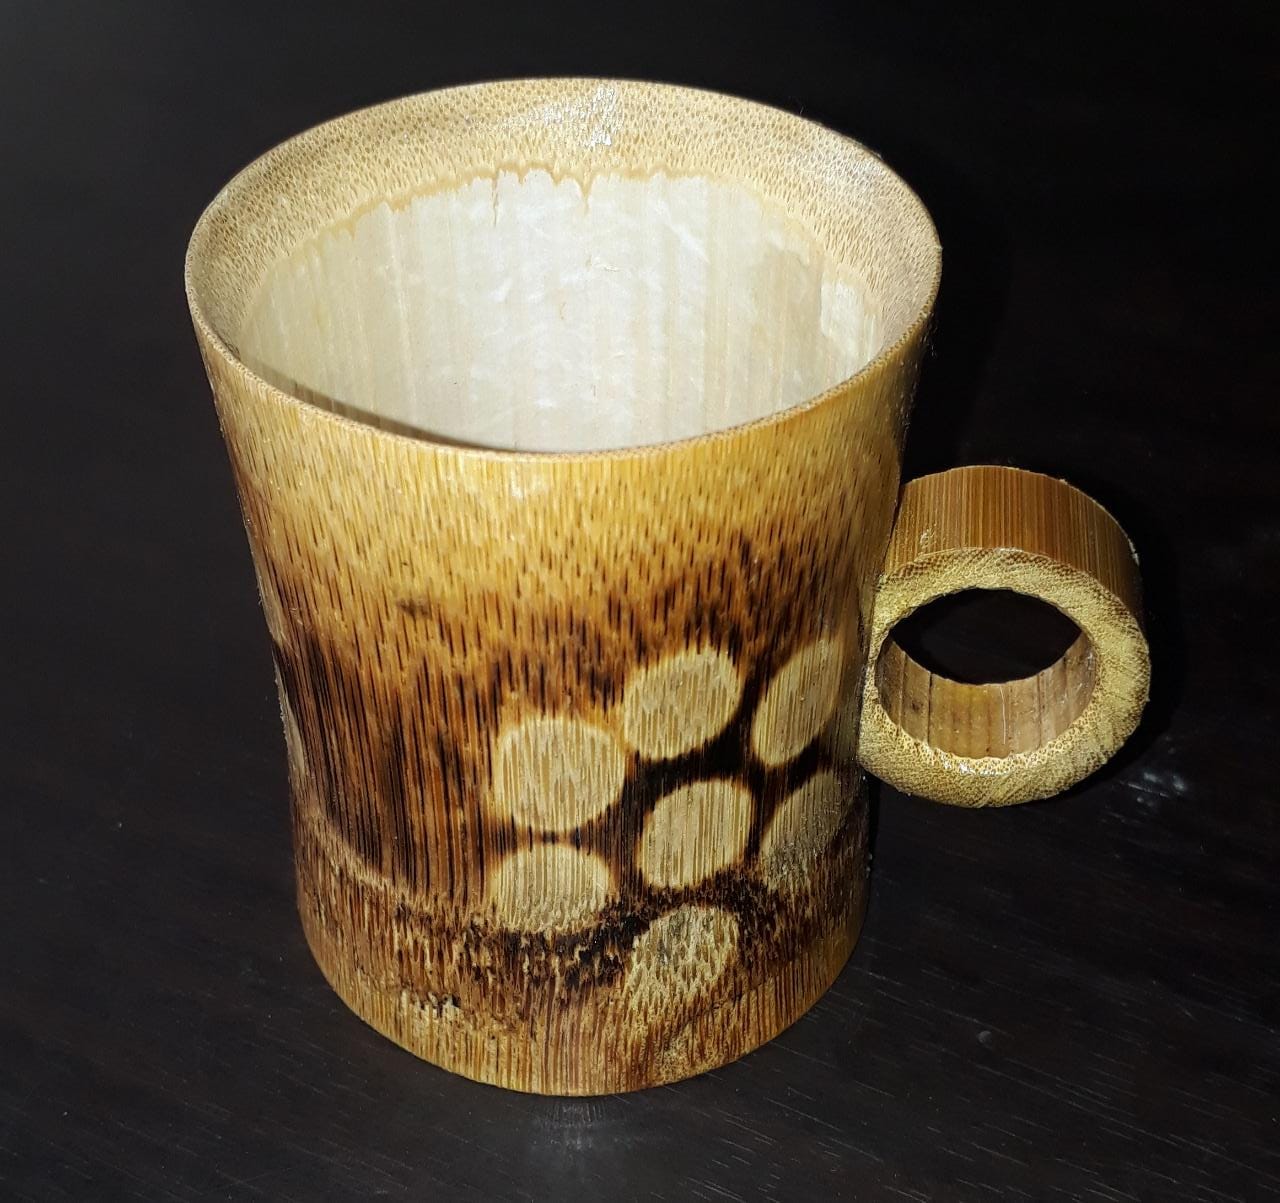 https://www.ethicaonline.com/wp-content/uploads/2020/02/bamboo-cup-new.jpeg